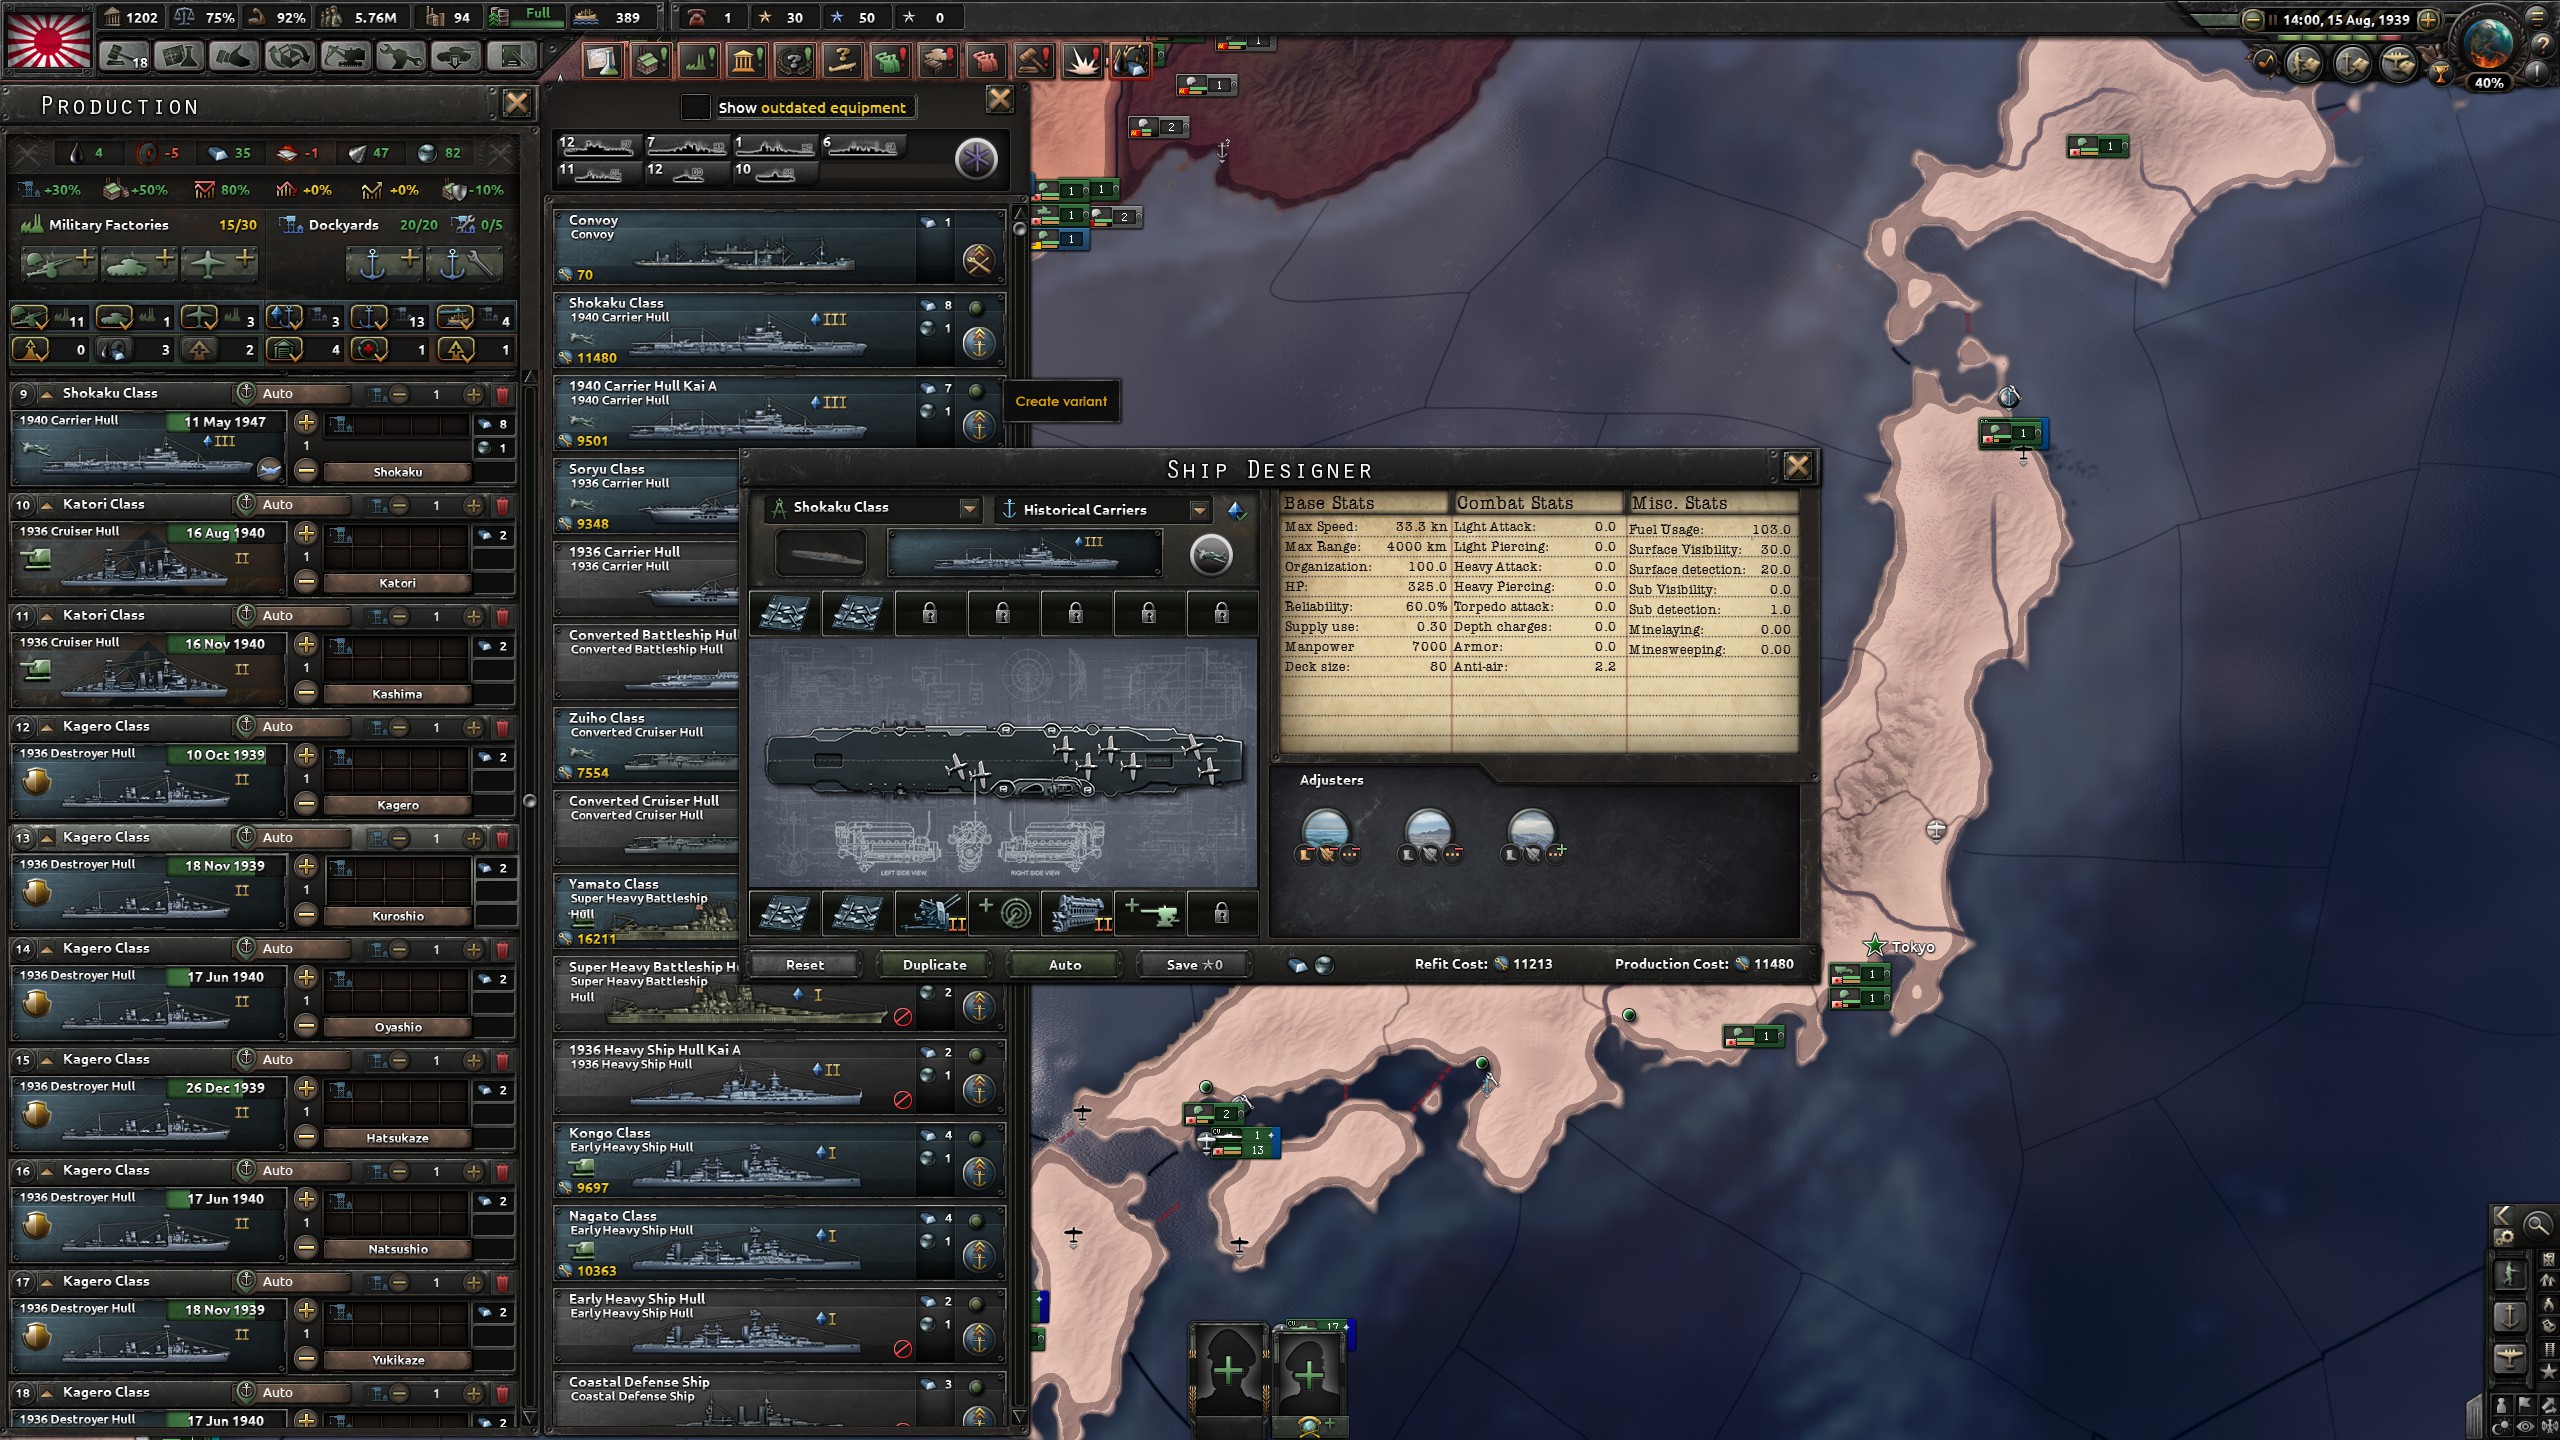 Hearts of Iron 4 division templates how to manage your forces